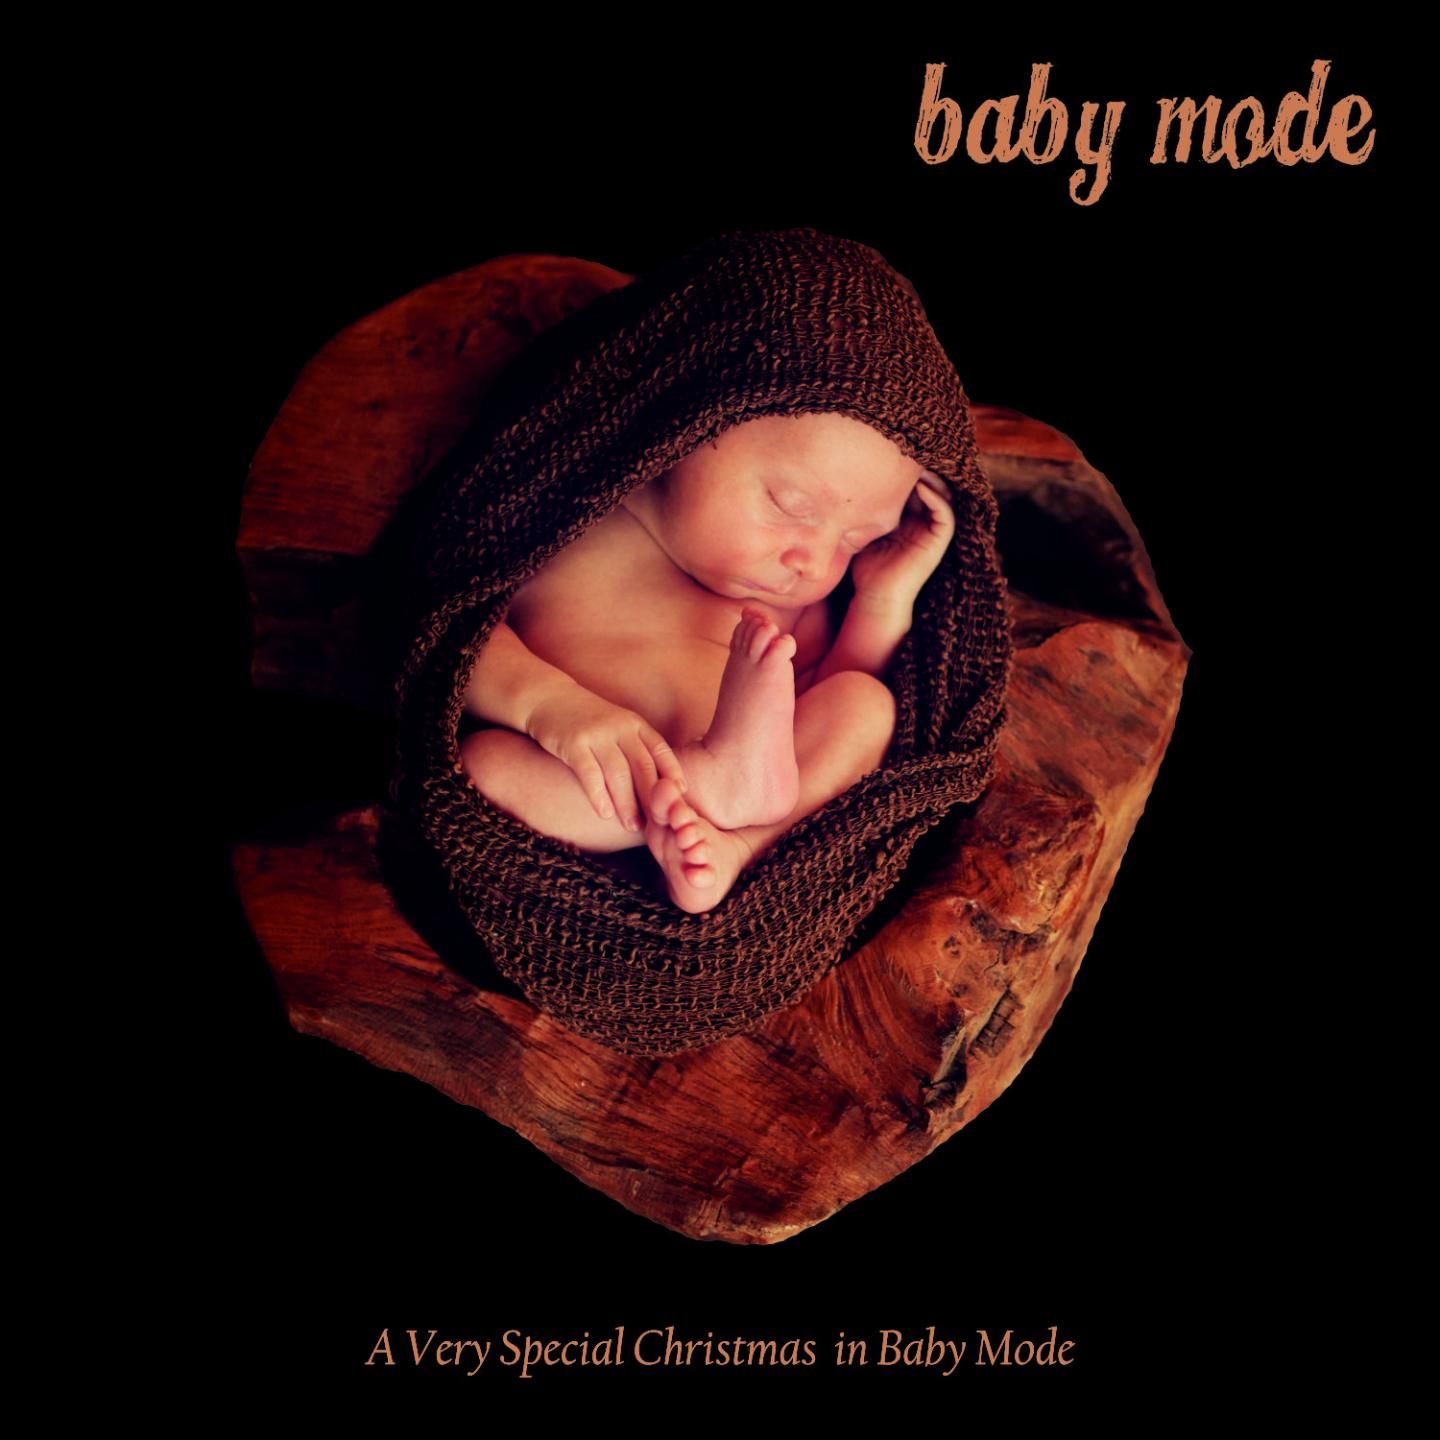 The First Noel (Baby Mode)